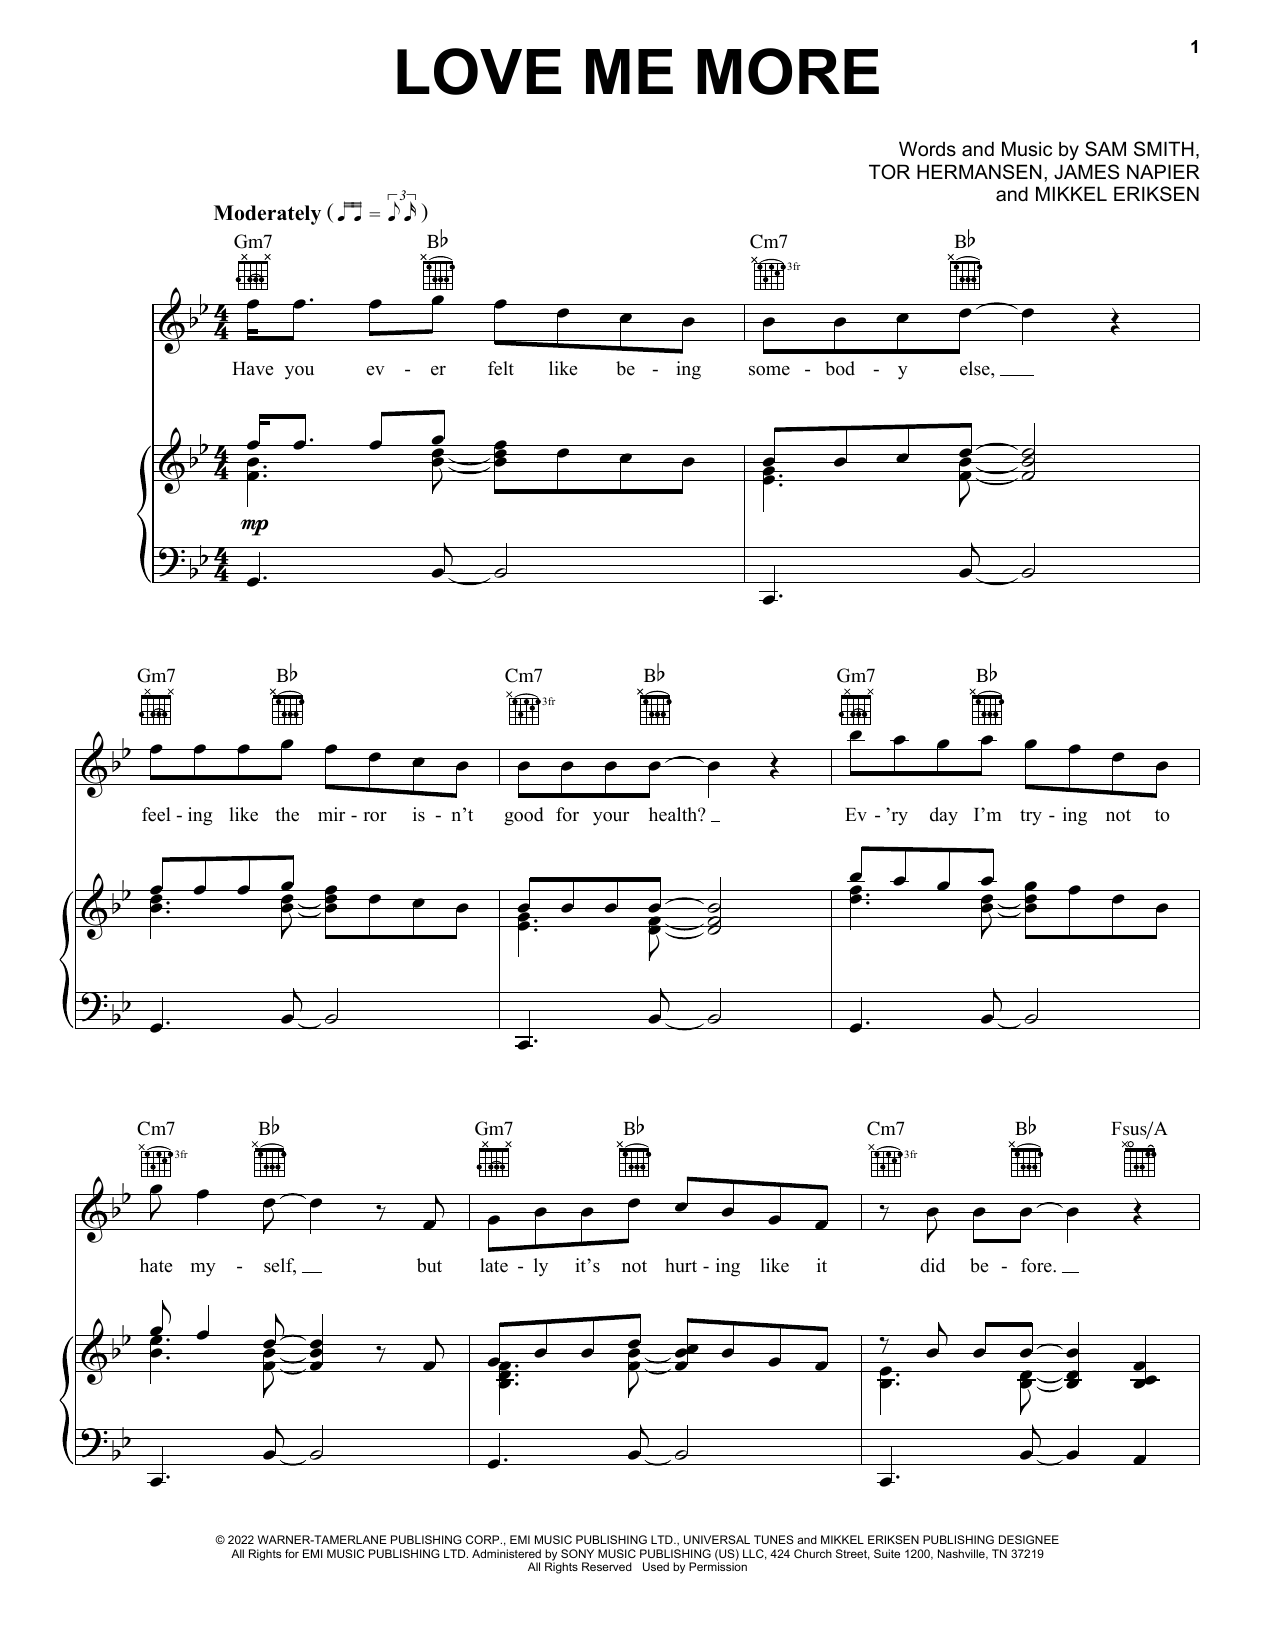 Sam Smith Love Me More sheet music notes and chords. Download Printable PDF.